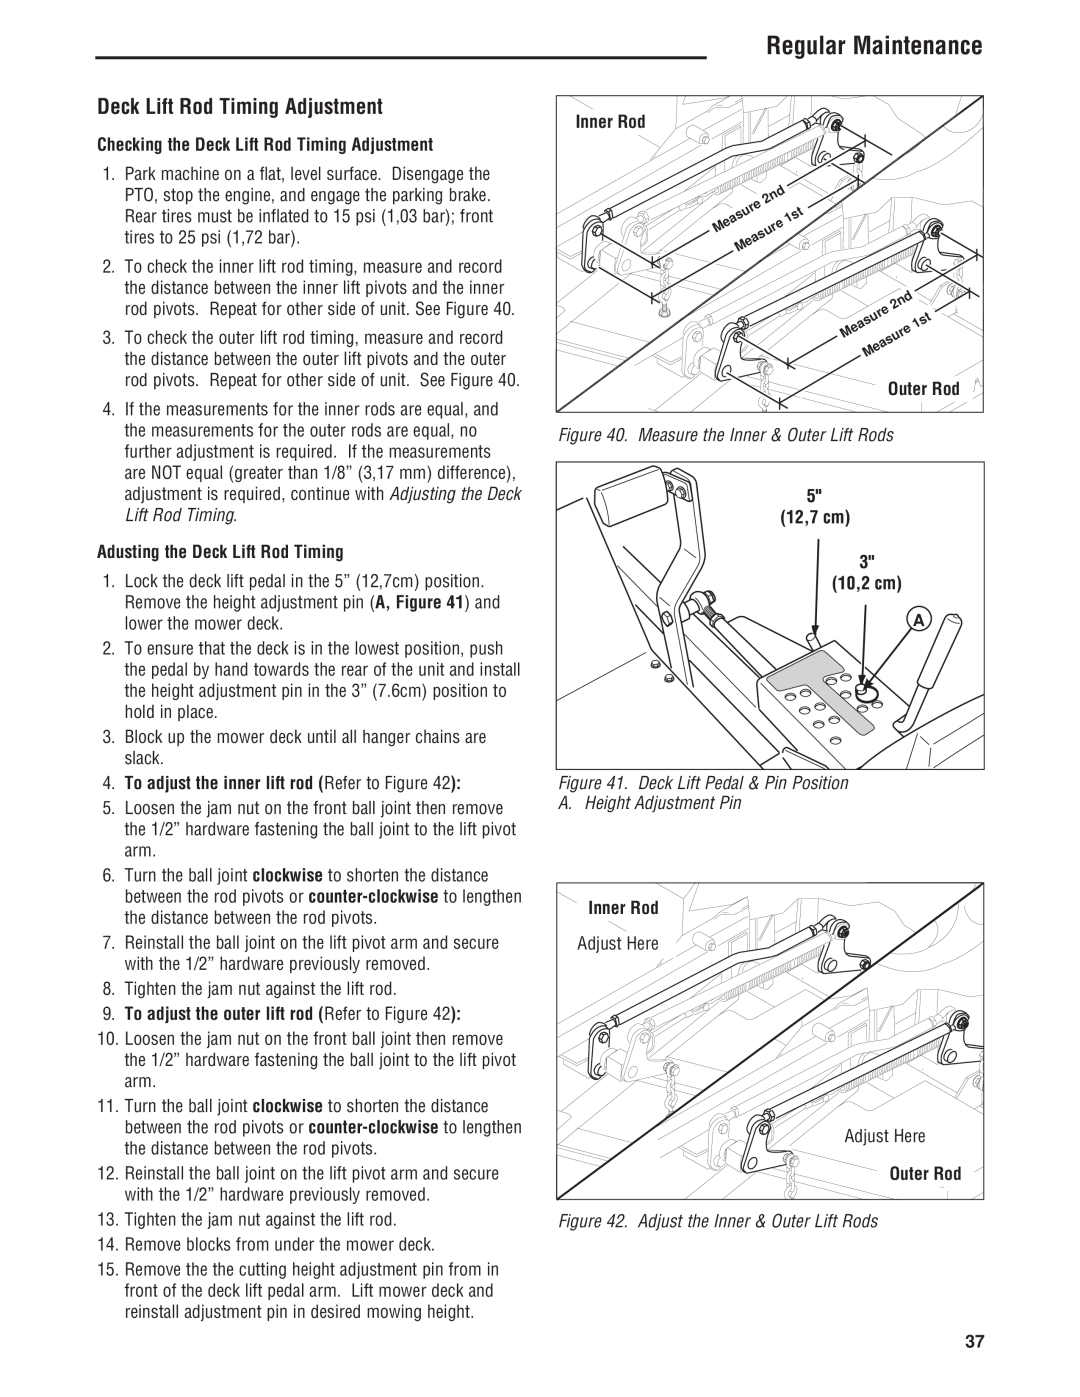 Simplicity 5101604 manual Regular Maintenance, Checking the Deck Lift Rod Timing Adjustment, Outer Rod, Inner Rod 